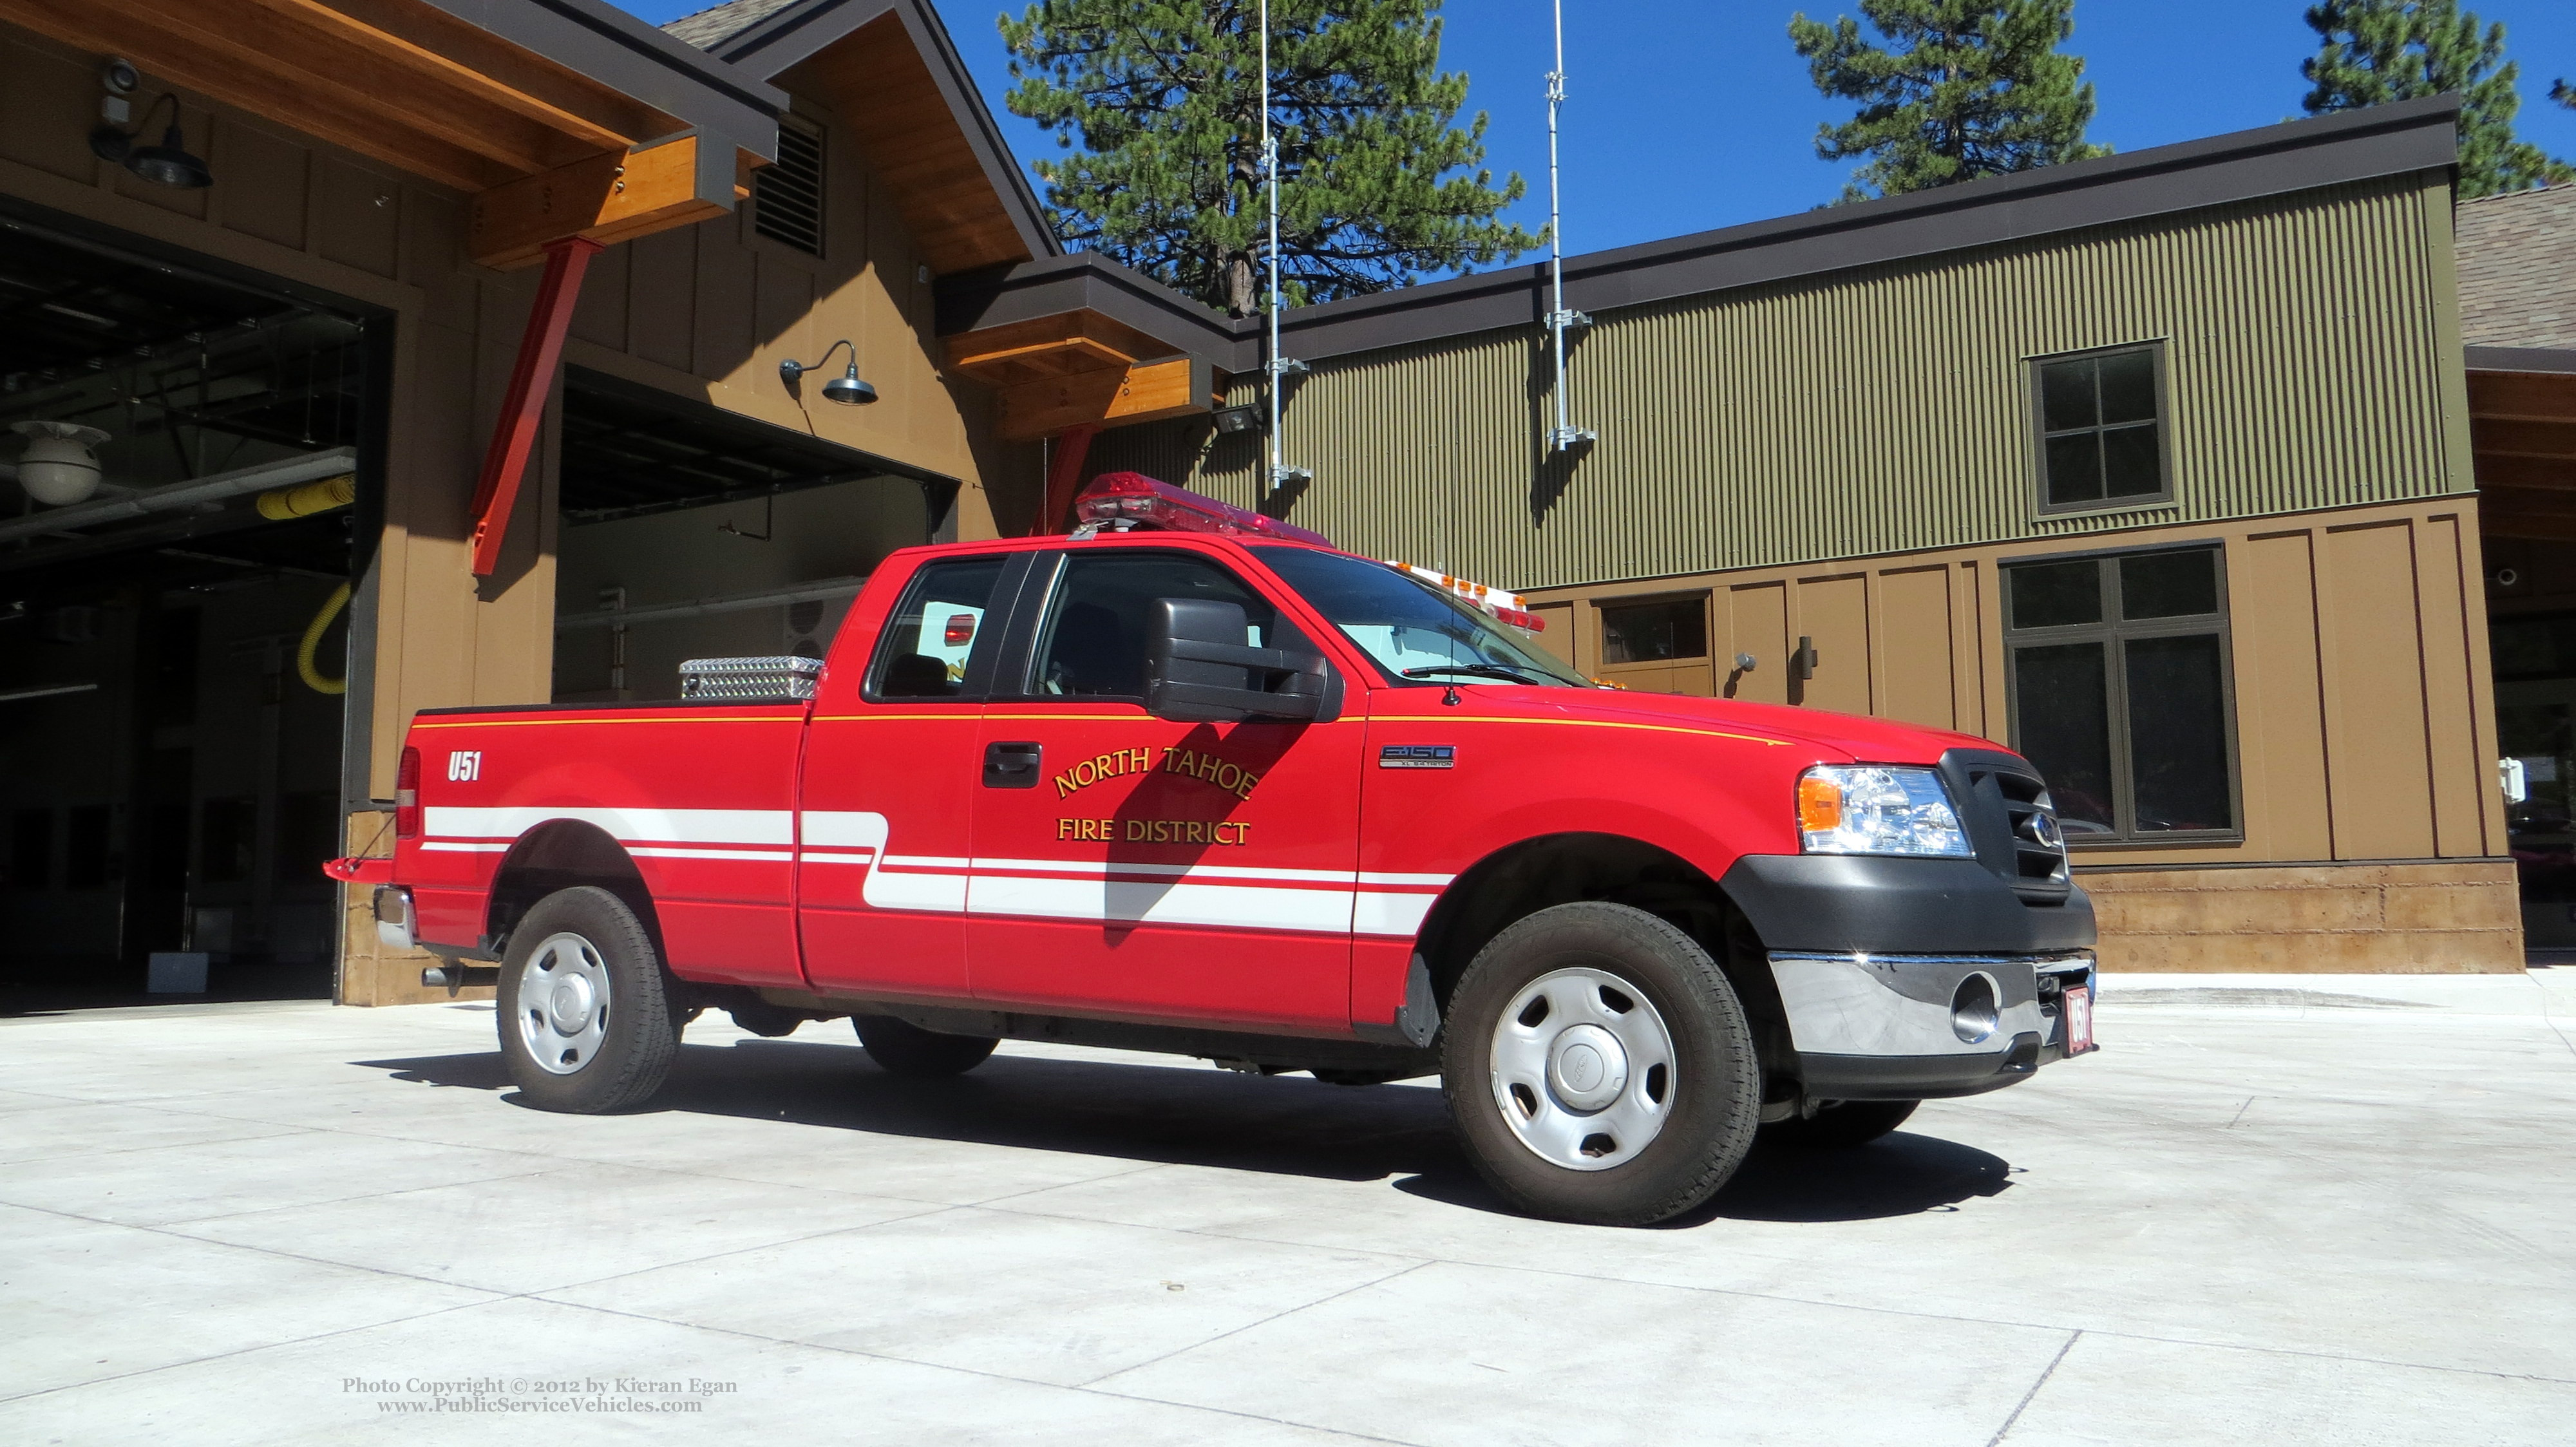 A photo  of North Tahoe Fire District
            Utility 51, a 2004-2008 Ford F-150 Super Cab             taken by Kieran Egan